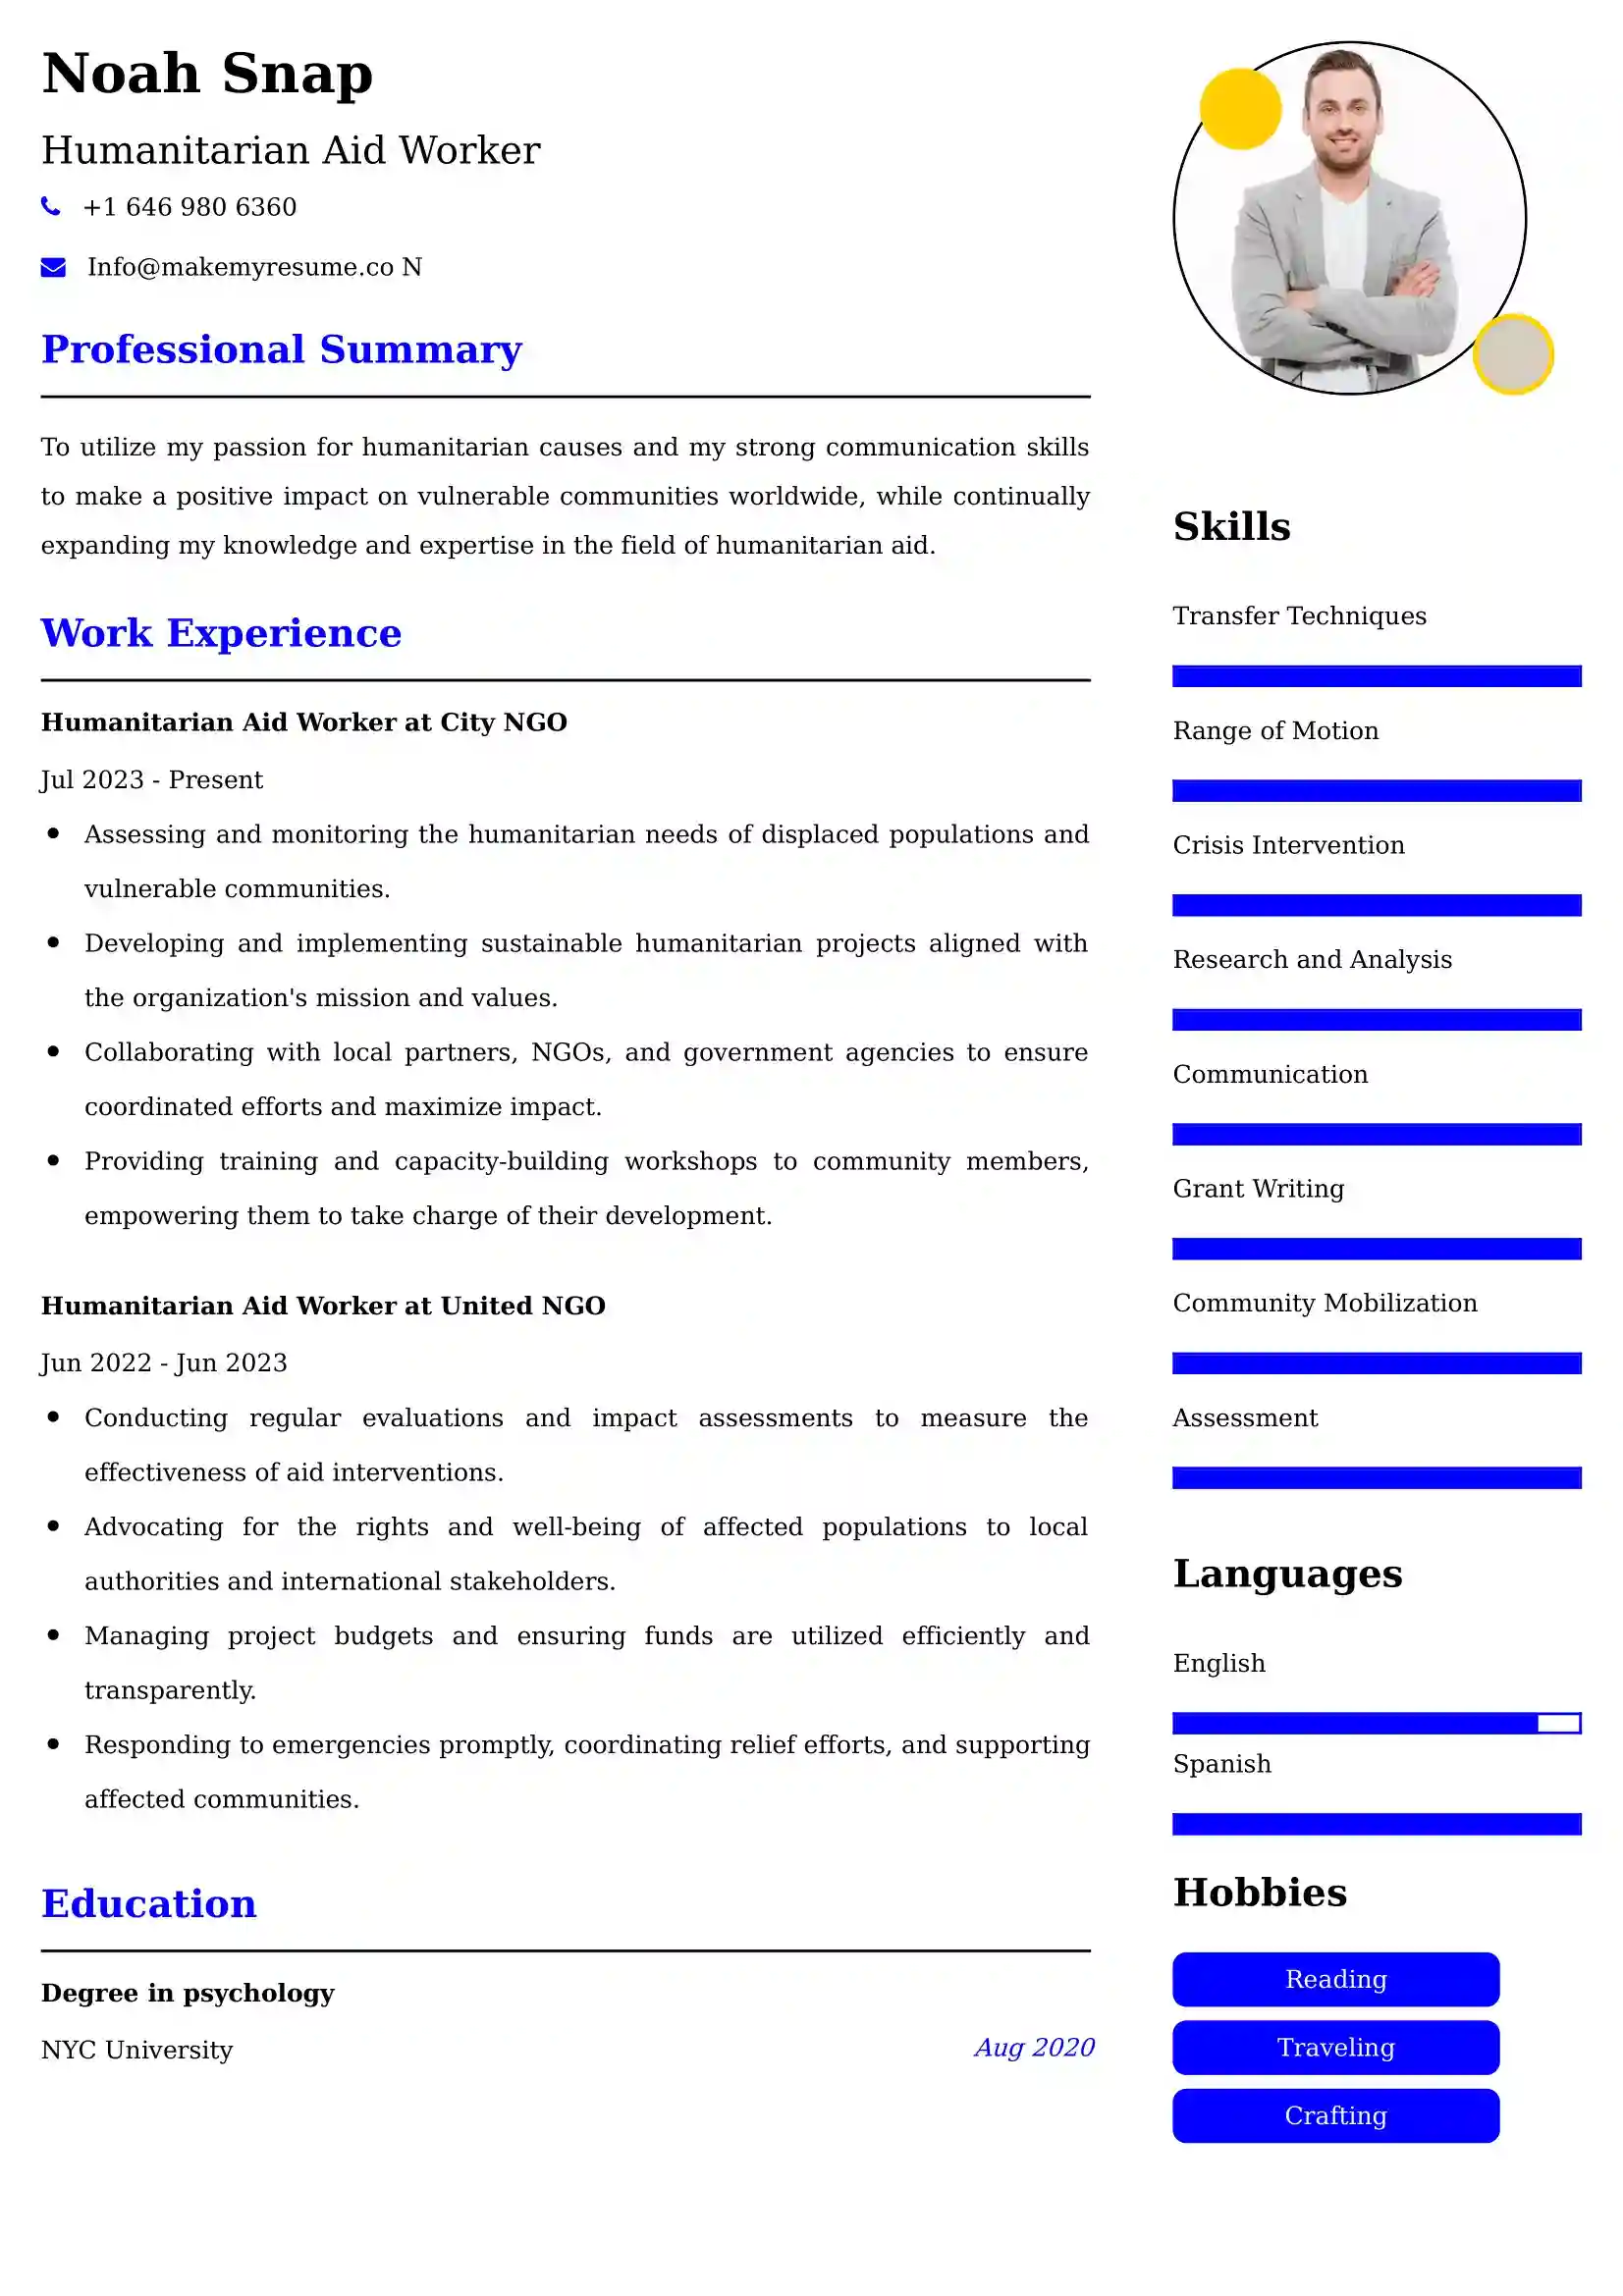 Humanitarian Aid Worker Resume Examples - Brazilian Format, Latest Template